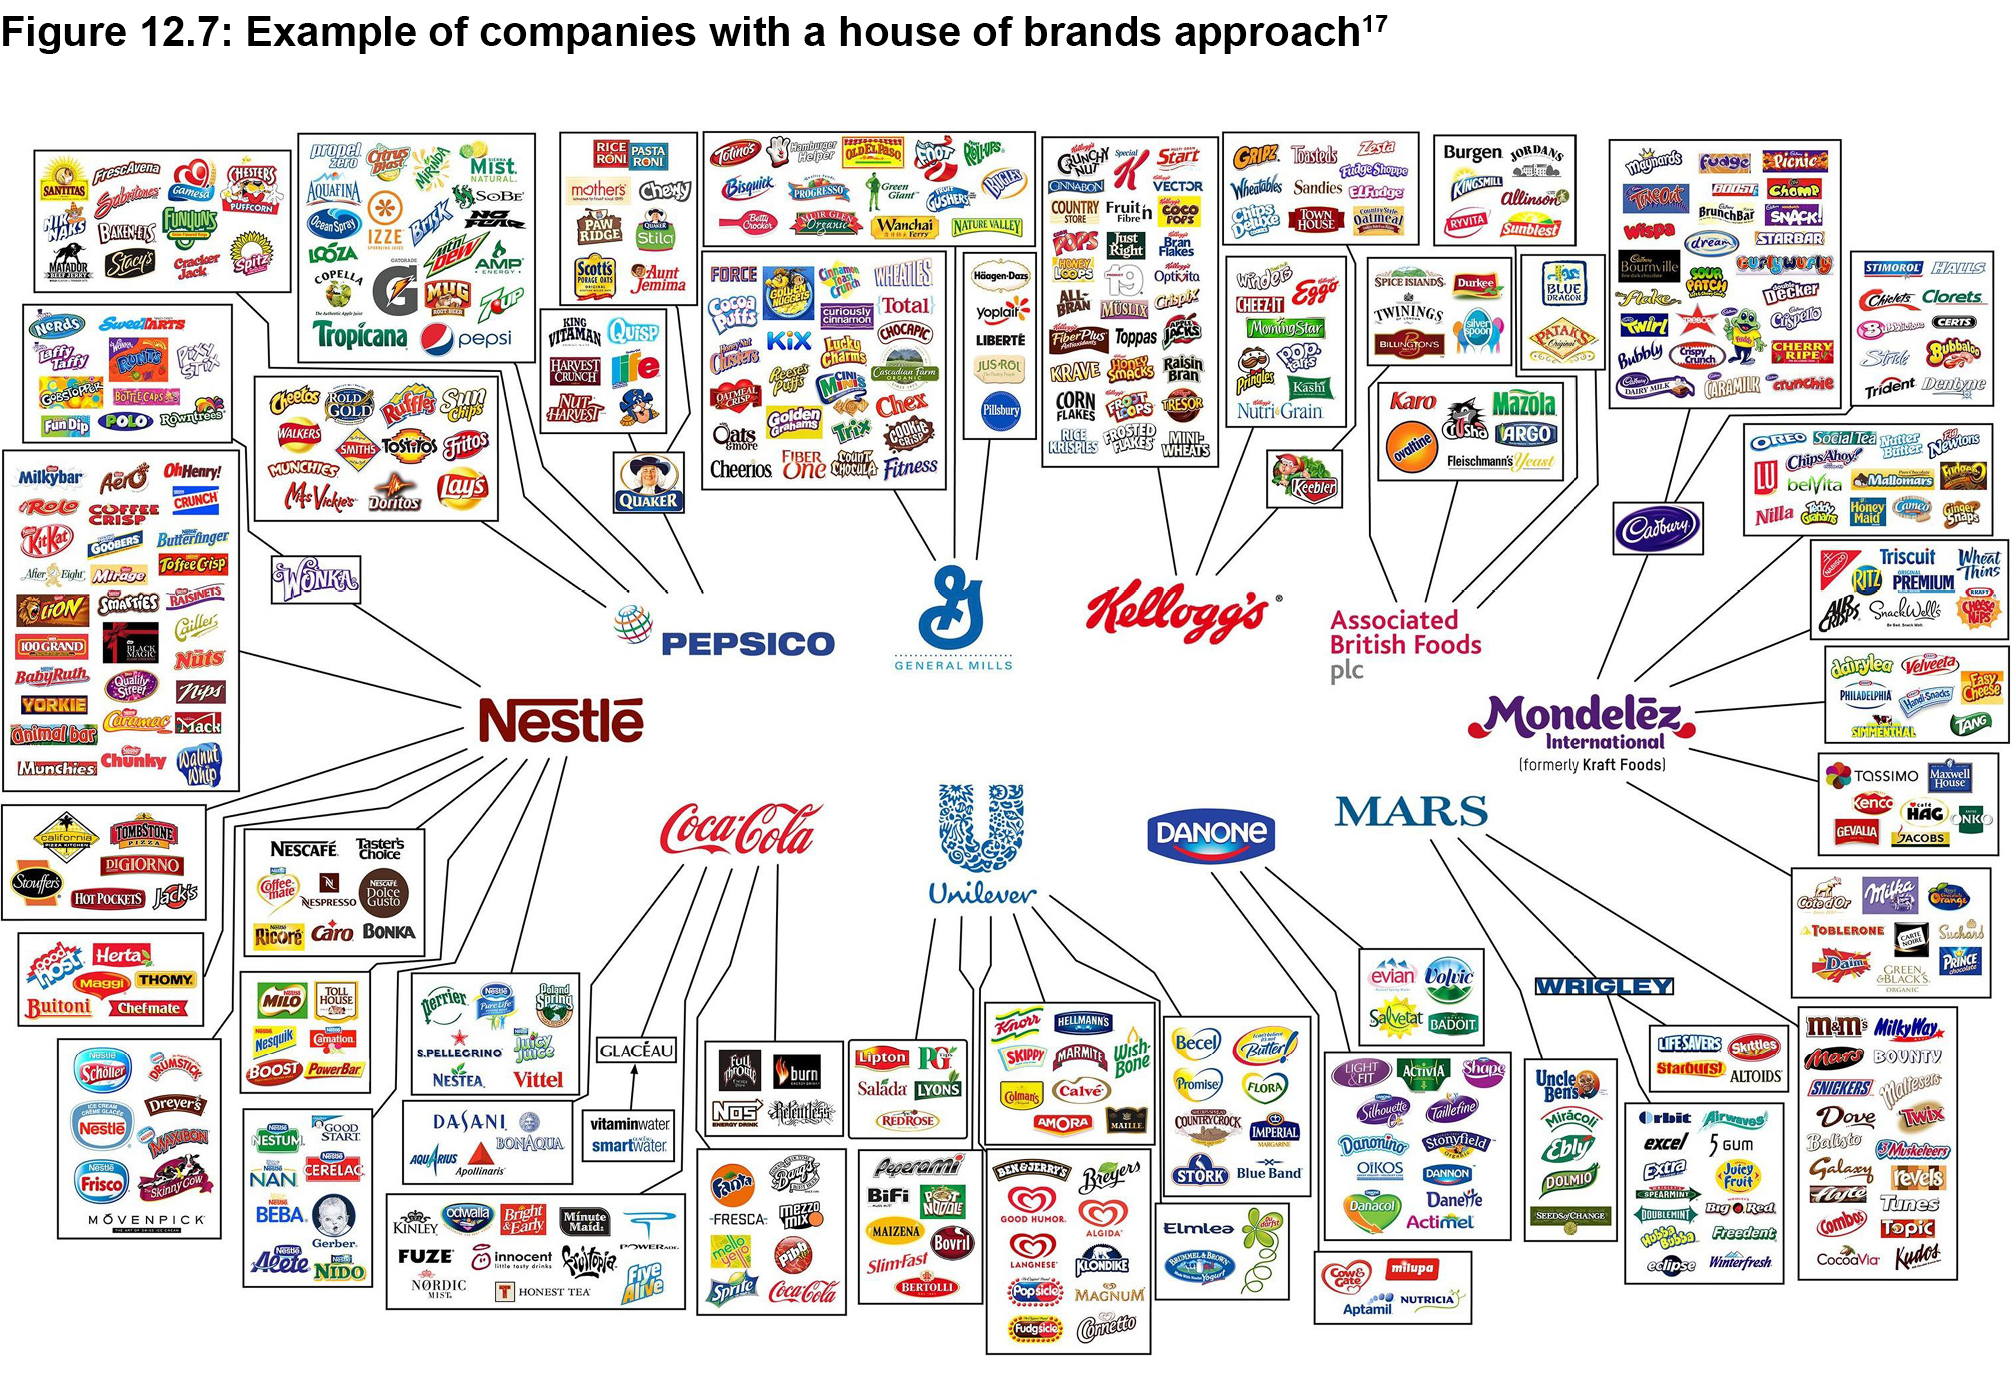 Figure 12.7: Example of companies with a house of brands approach